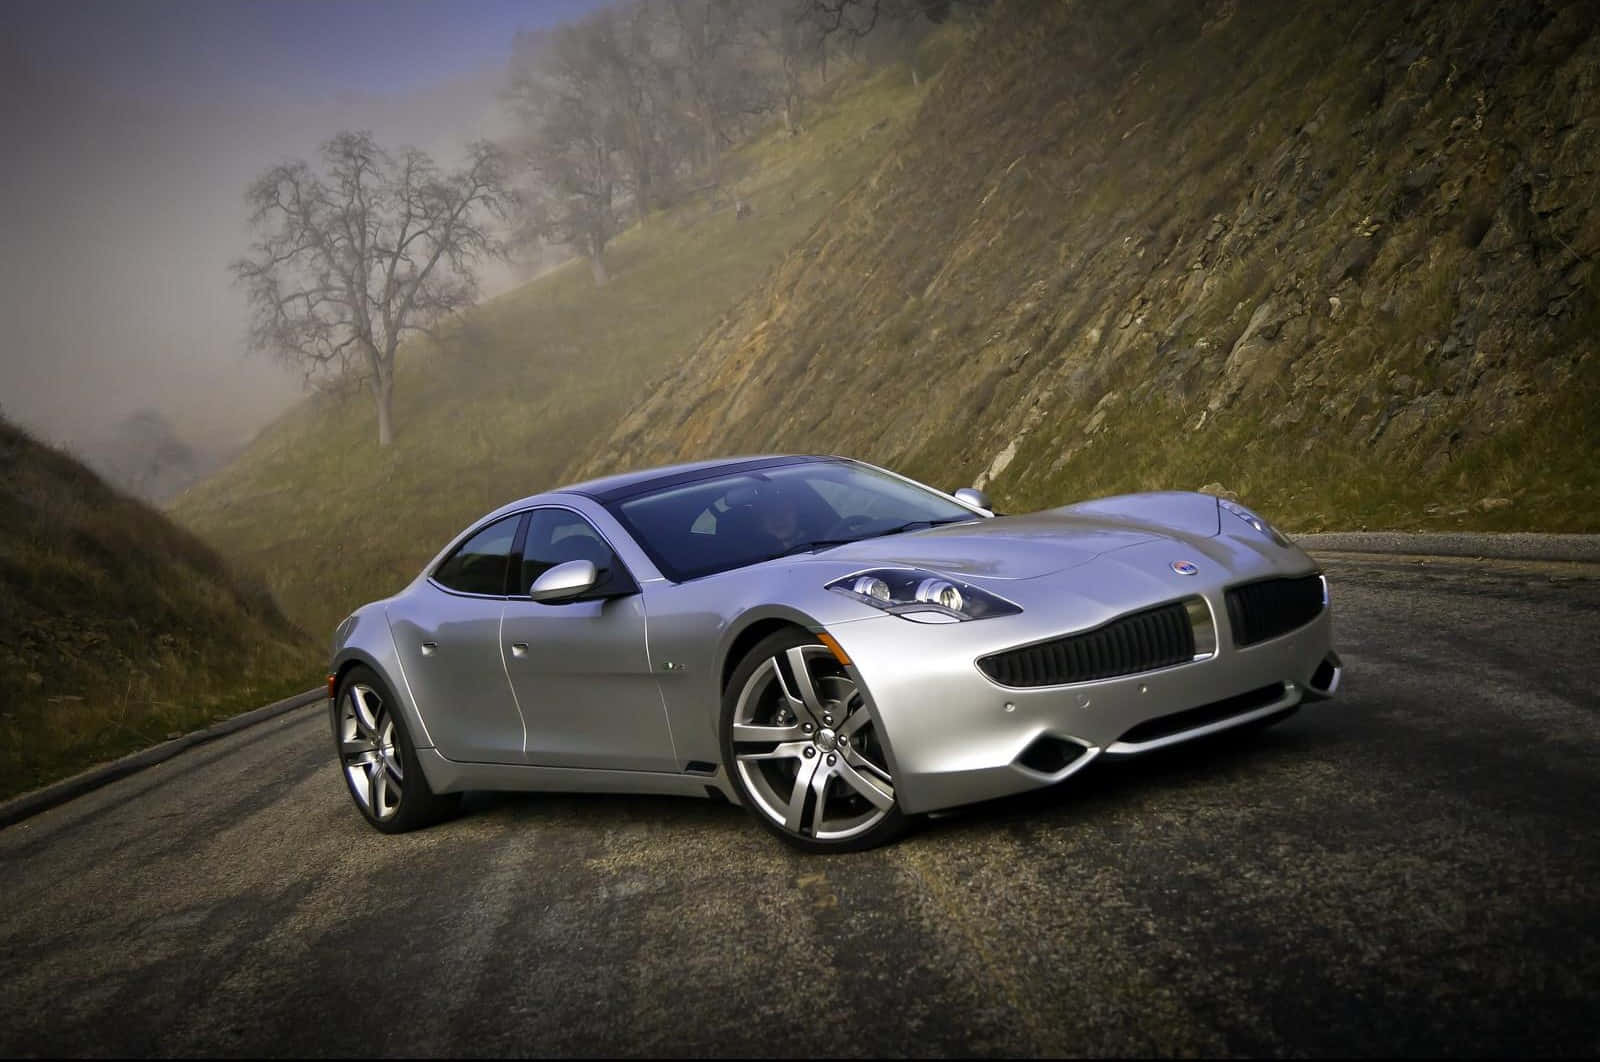 Fisker electric vehicle parked in a modern urban setting Wallpaper